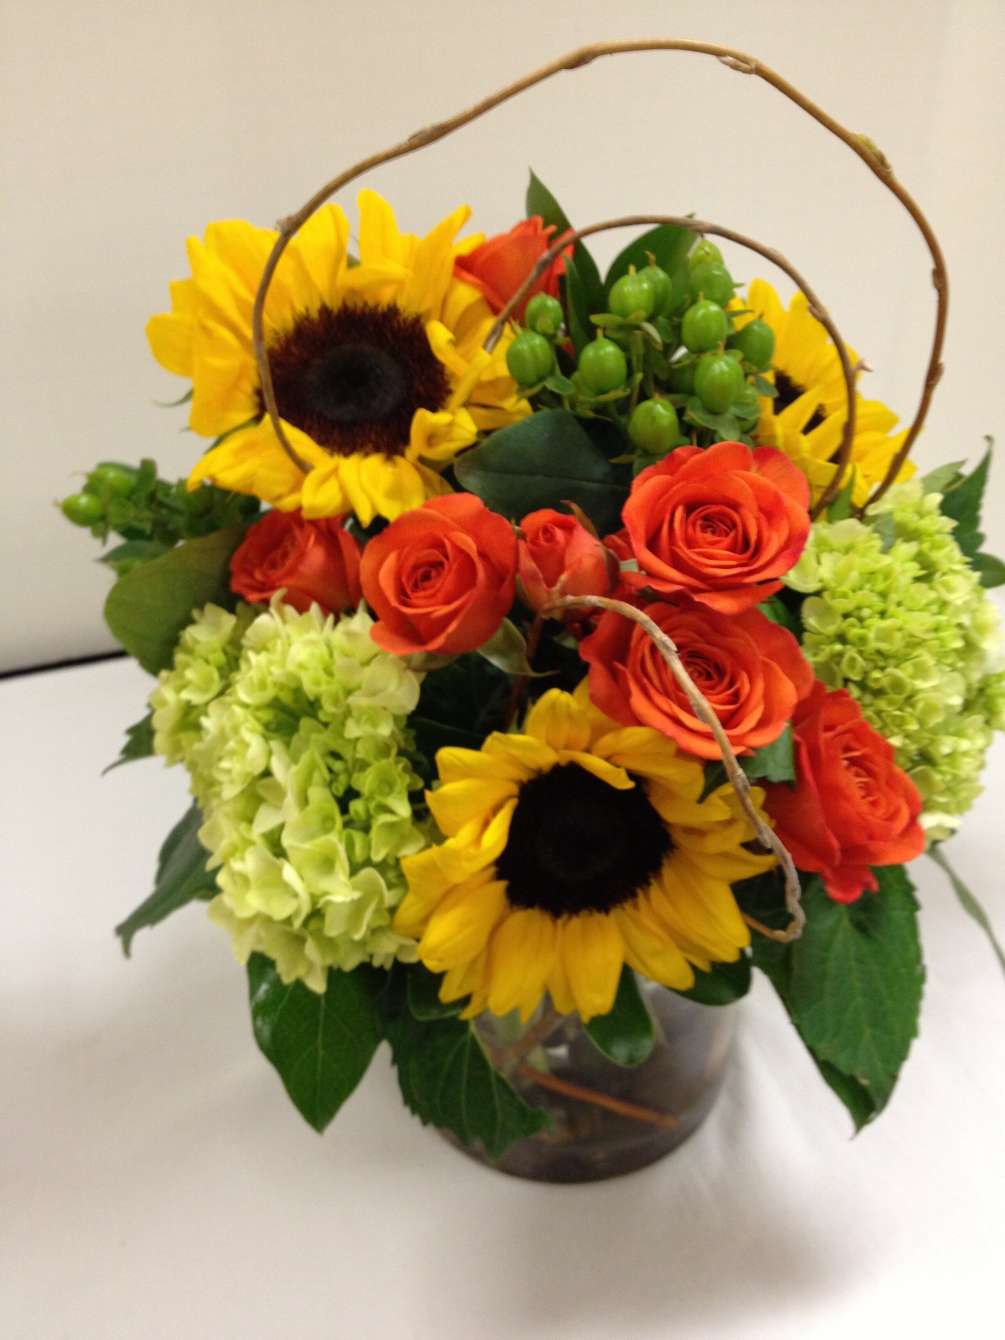 Casual elegance and vivid colors with bright sunflowers, mixed green hydrangeas, and